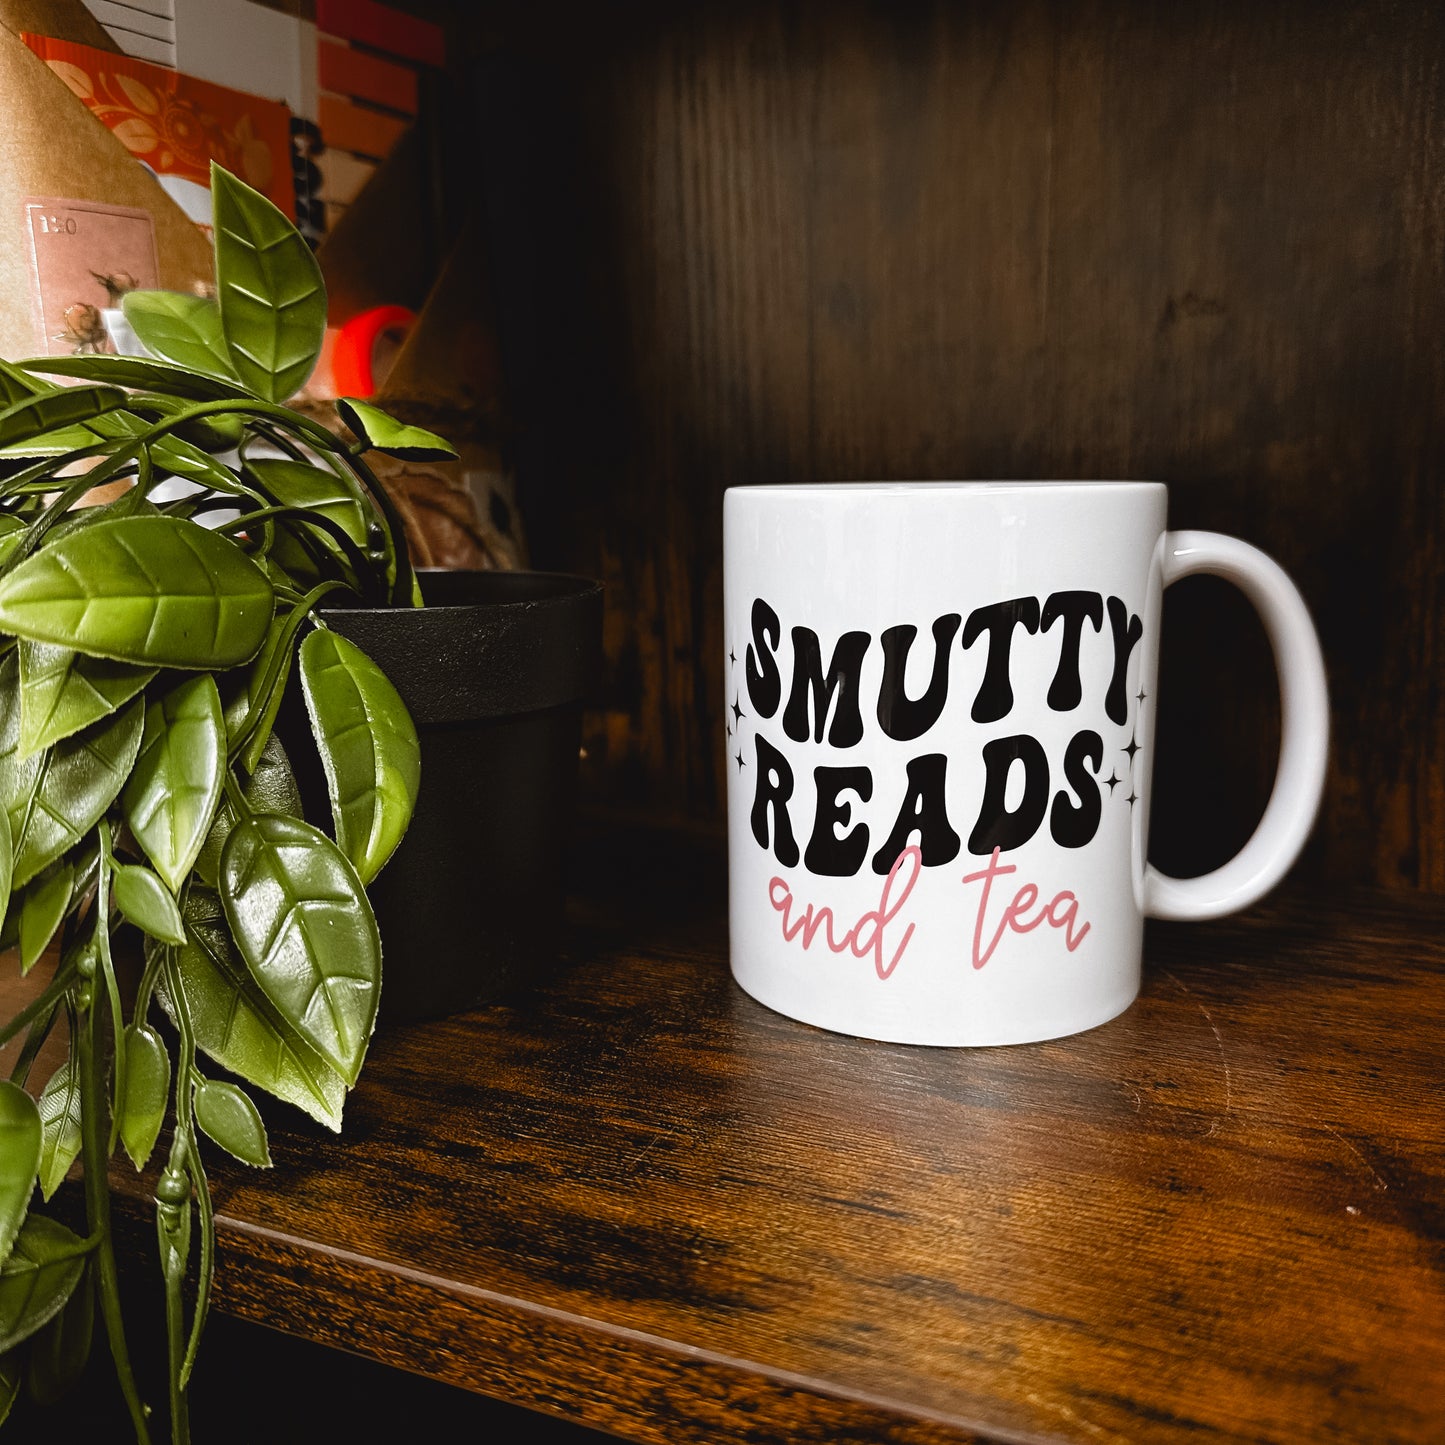 Smutty Reads and Tea